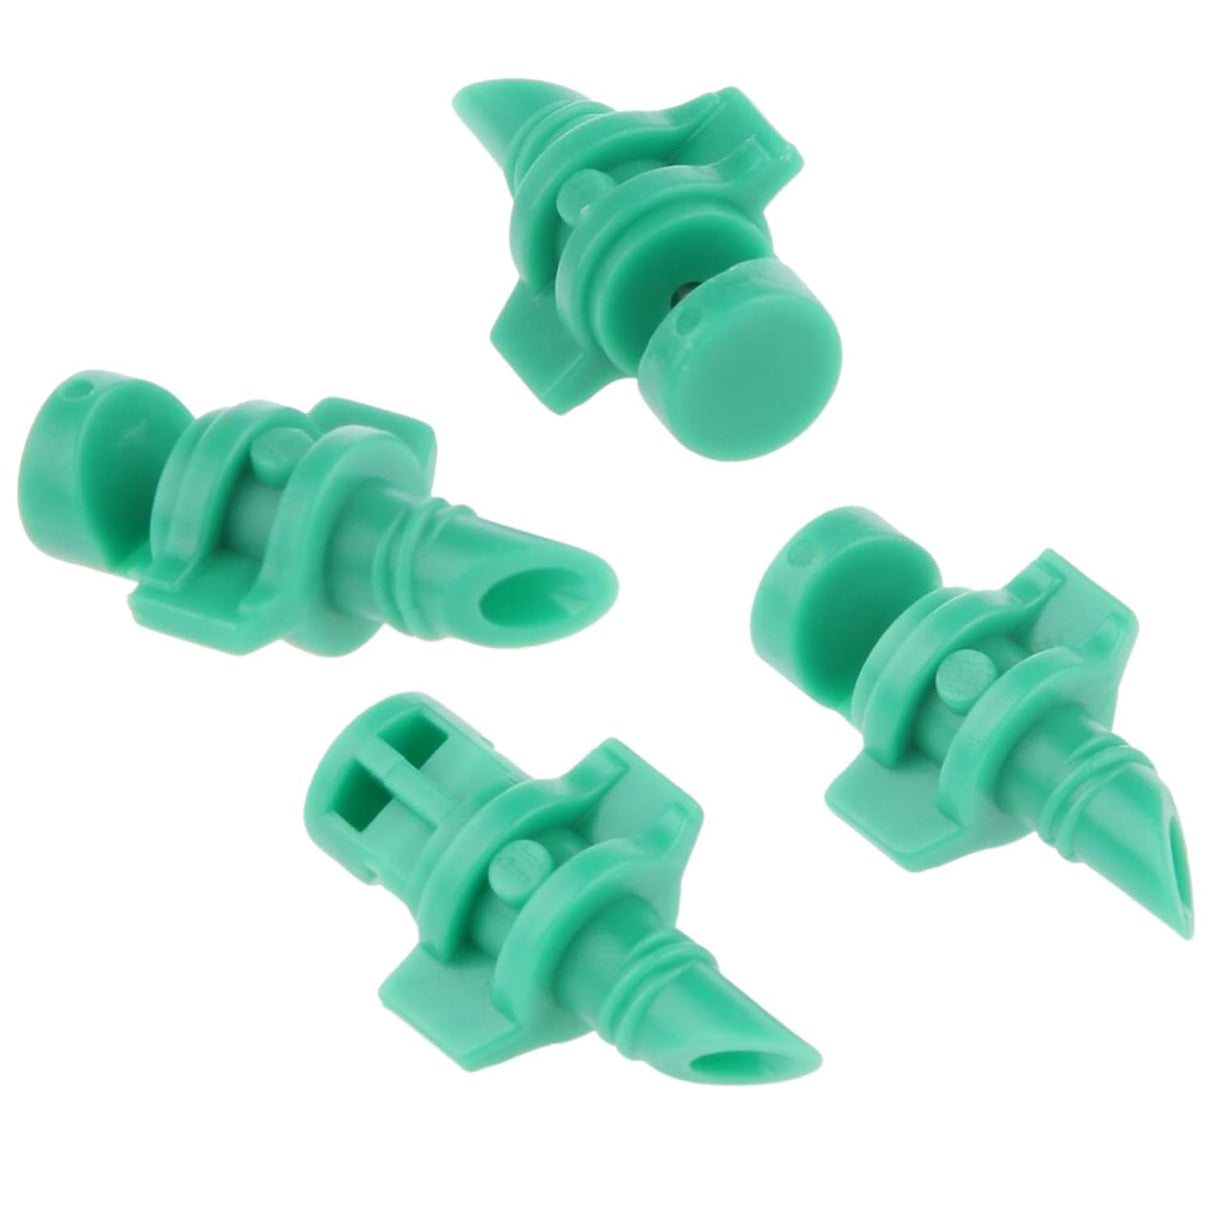 Singhal Water Spray Misting Nozzle Pack of 200, Mini Sprinkler Sprayer Drip Irrigation for Plants Garden Lawn Irrigation System 180 Degree, Plastic (Green, 200)